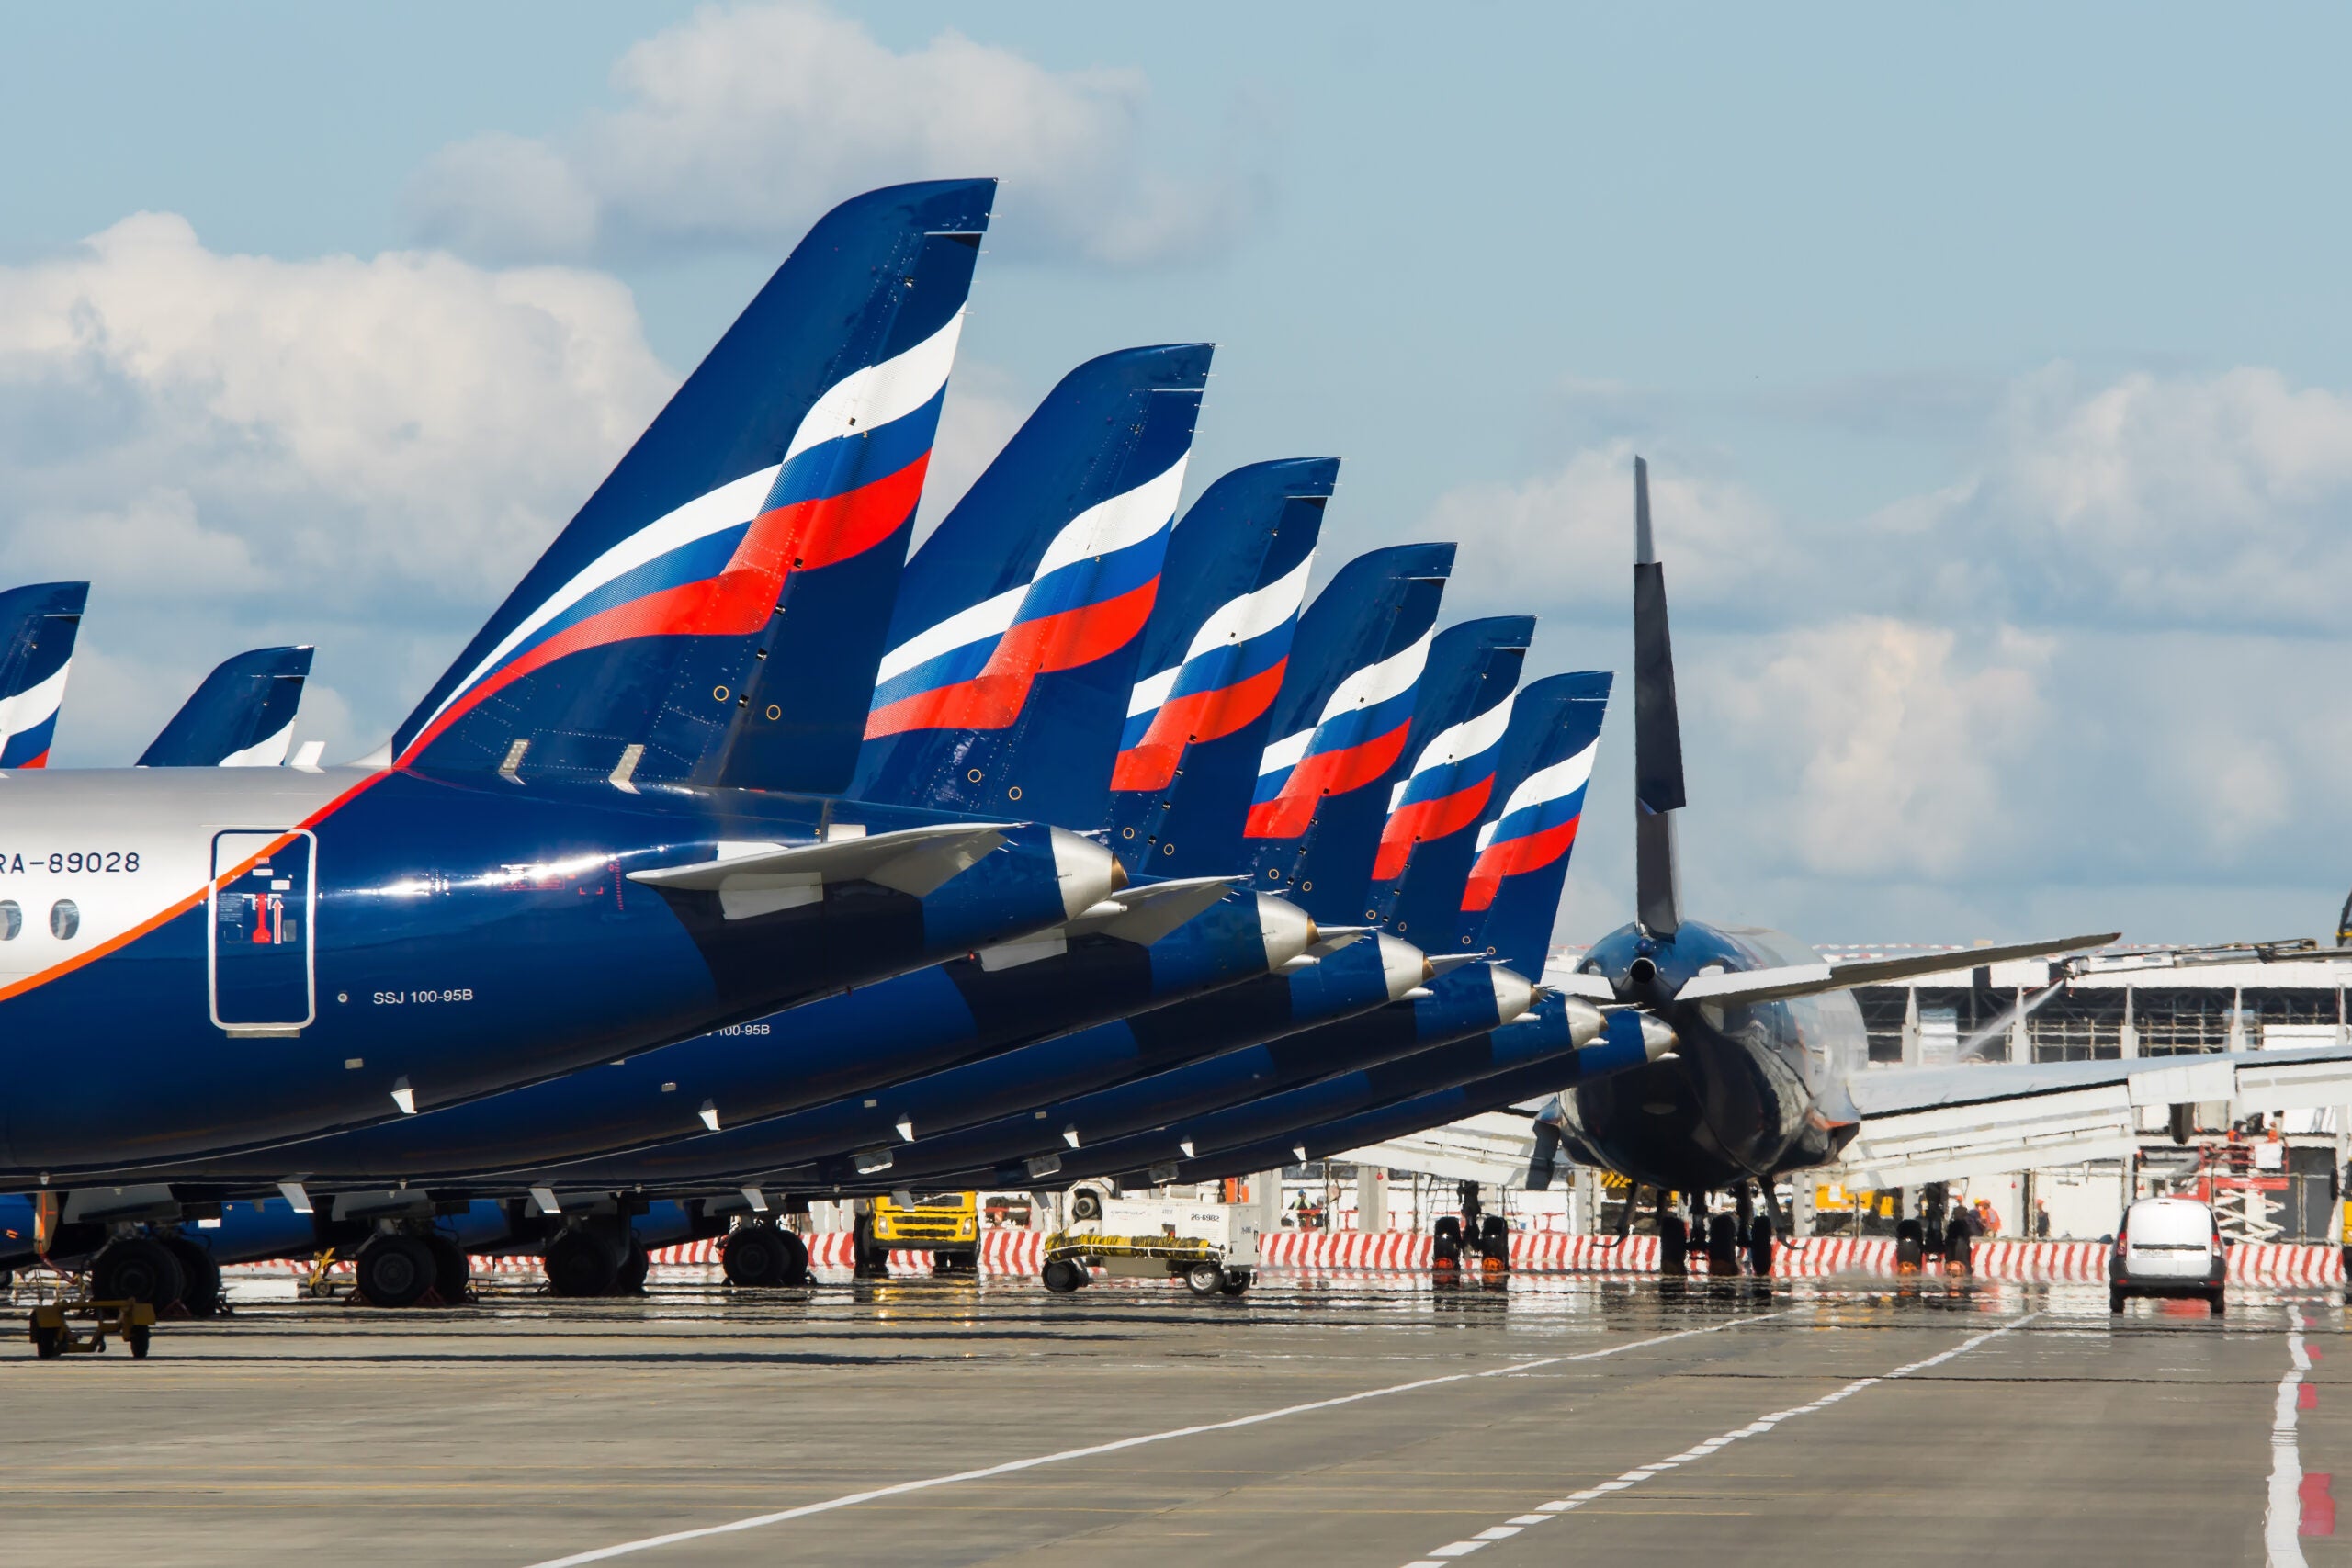 Russian Airworthiness Certificates Suspended By EU Aviation Safety Agency